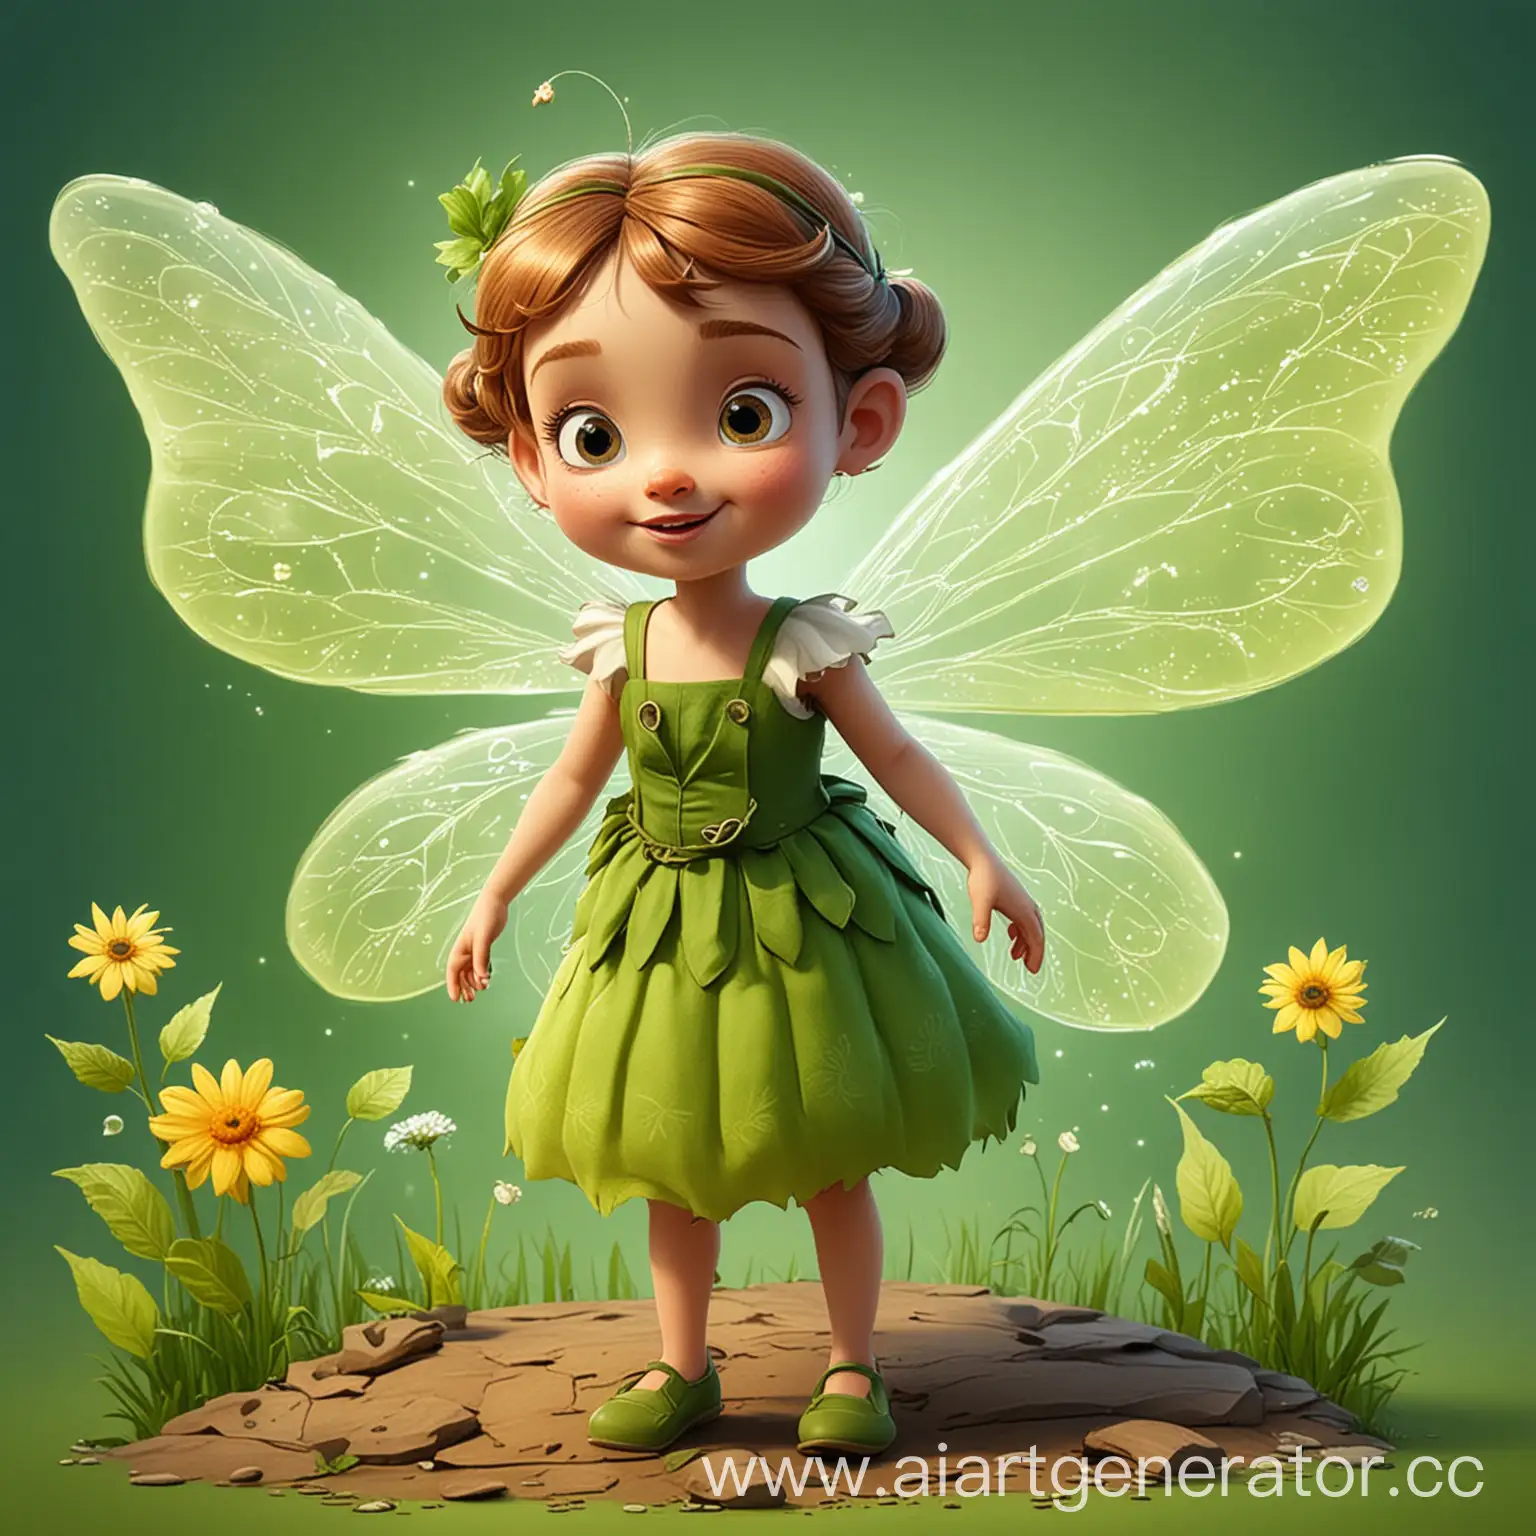 Whimsical-Cartoon-Environmental-Fairy-Tale-Character-for-Children